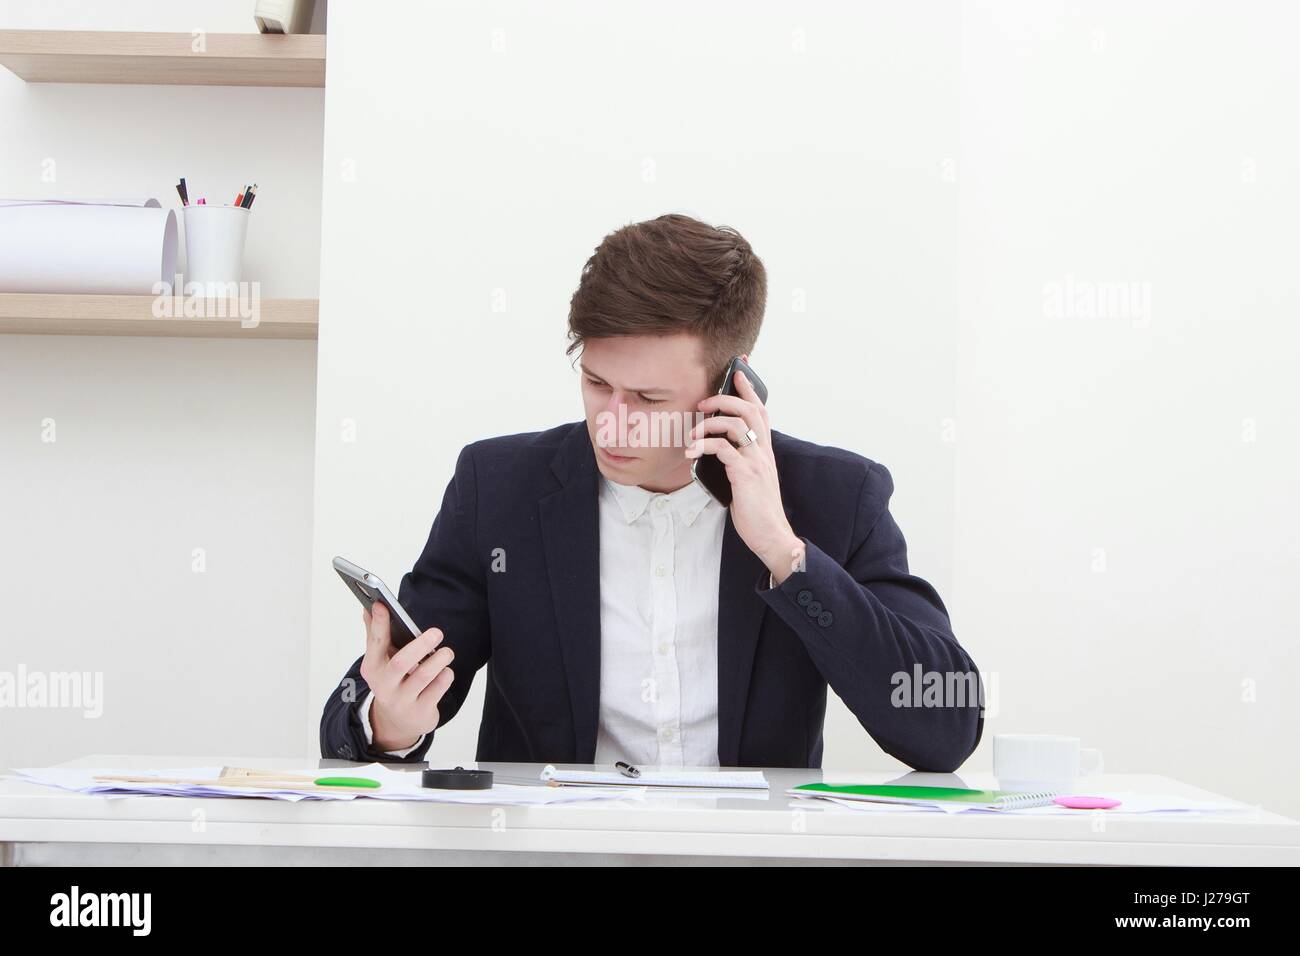 Executive business man working at office Stock Photo